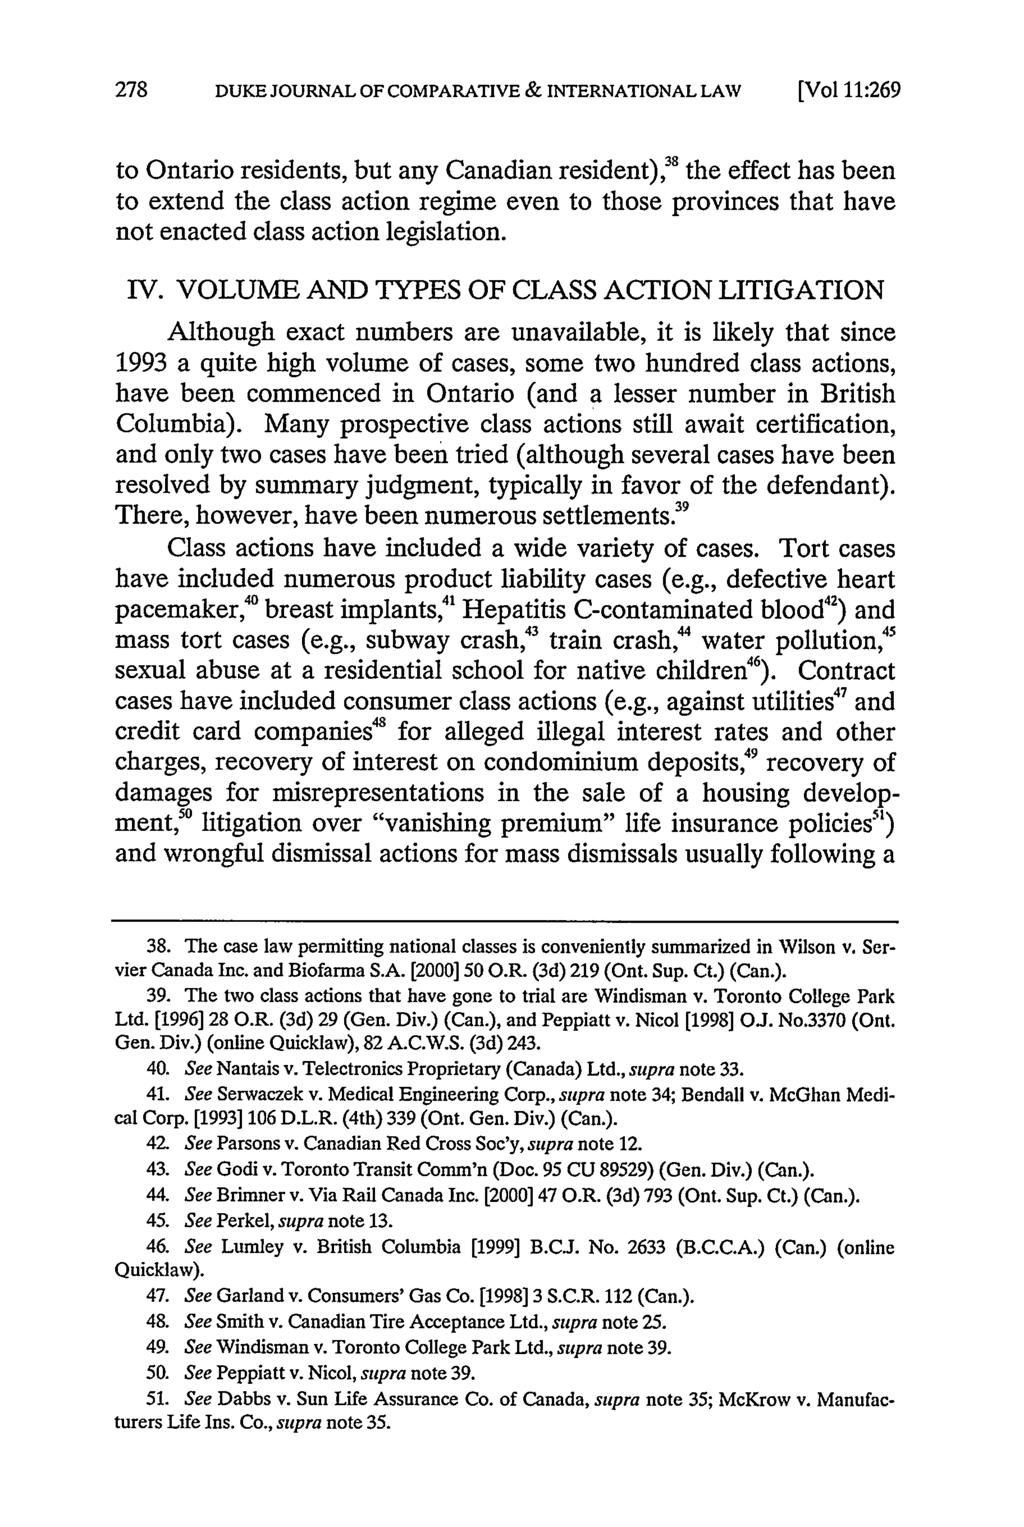 DUKE JOURNAL OF COMPARATIVE & INTERNATIONAL LAW [Vol111:269 to Ontario residents, but any Canadian resident), 3 8 the effect has been to extend the class action regime even to those provinces that